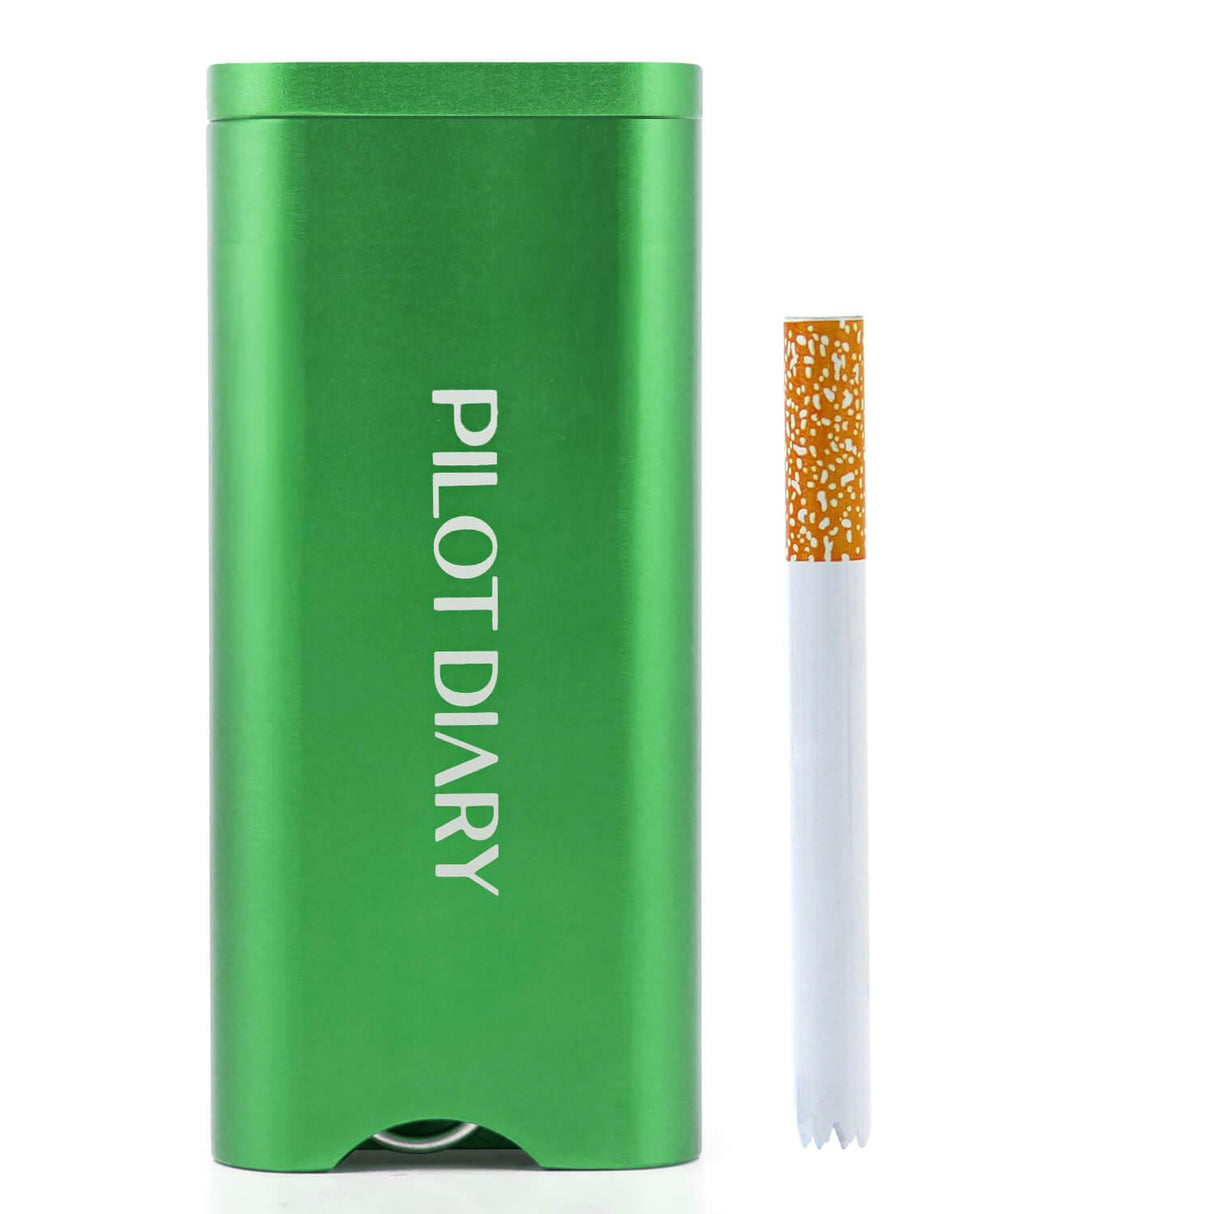 PILOT DIARY Metal Dugout One Hitter in Green with White Ceramic Bat - Front View